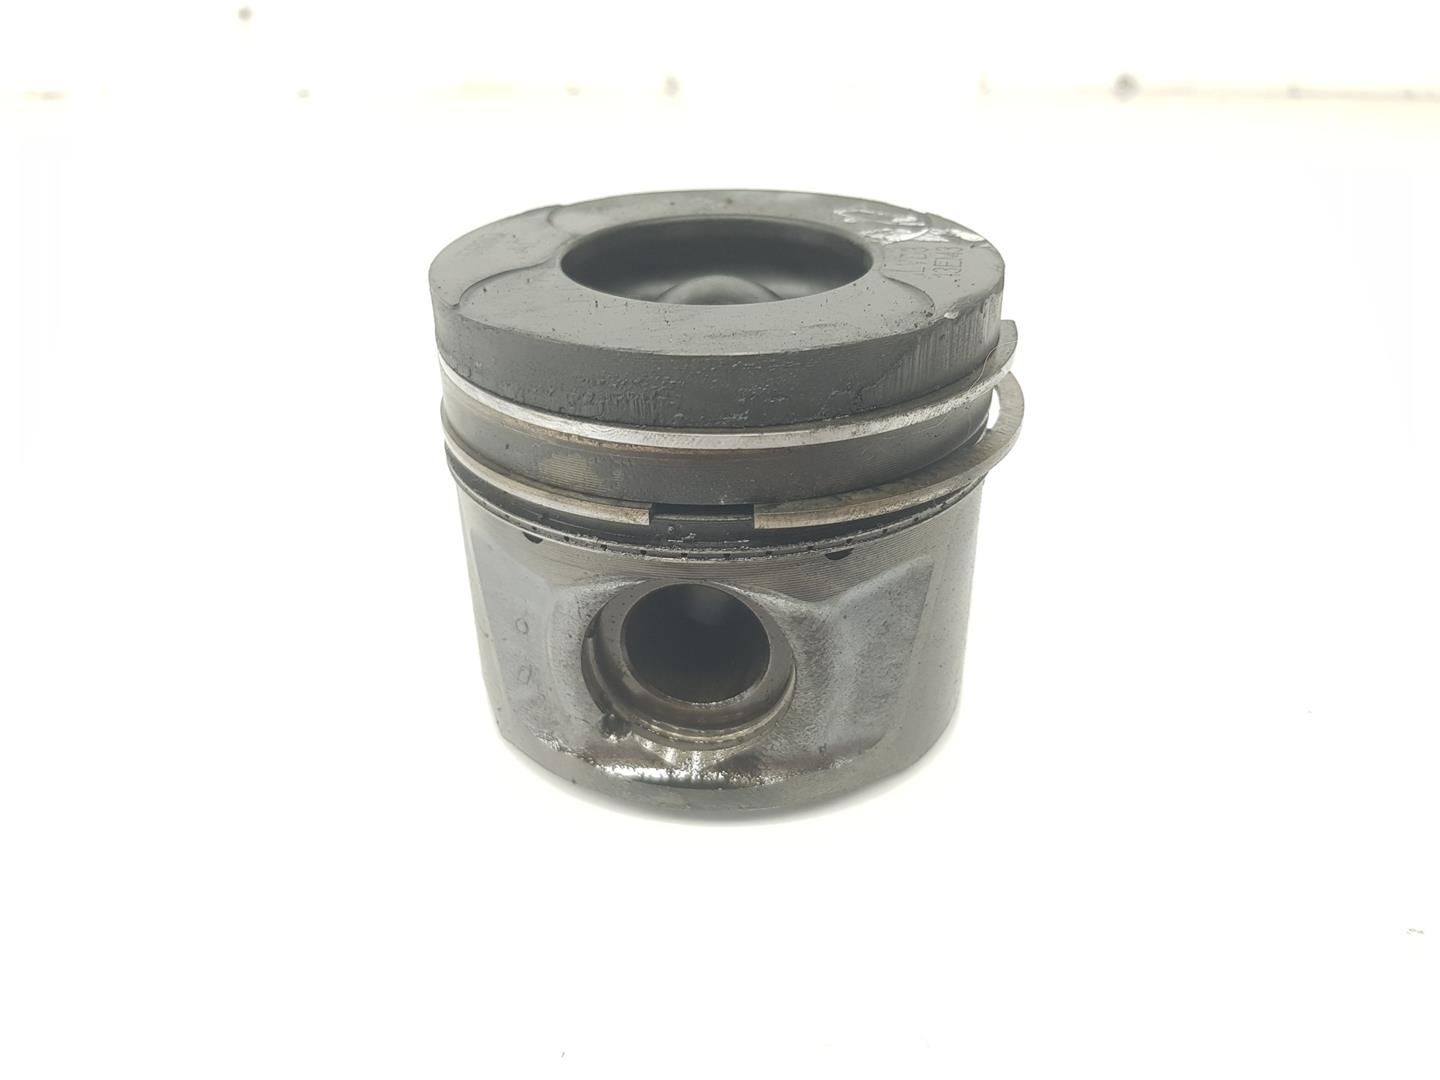 LAND ROVER Discovery 4 generation (2009-2016) Stūmoklis PISTON276DT, 276DT, 1111AA 19879490